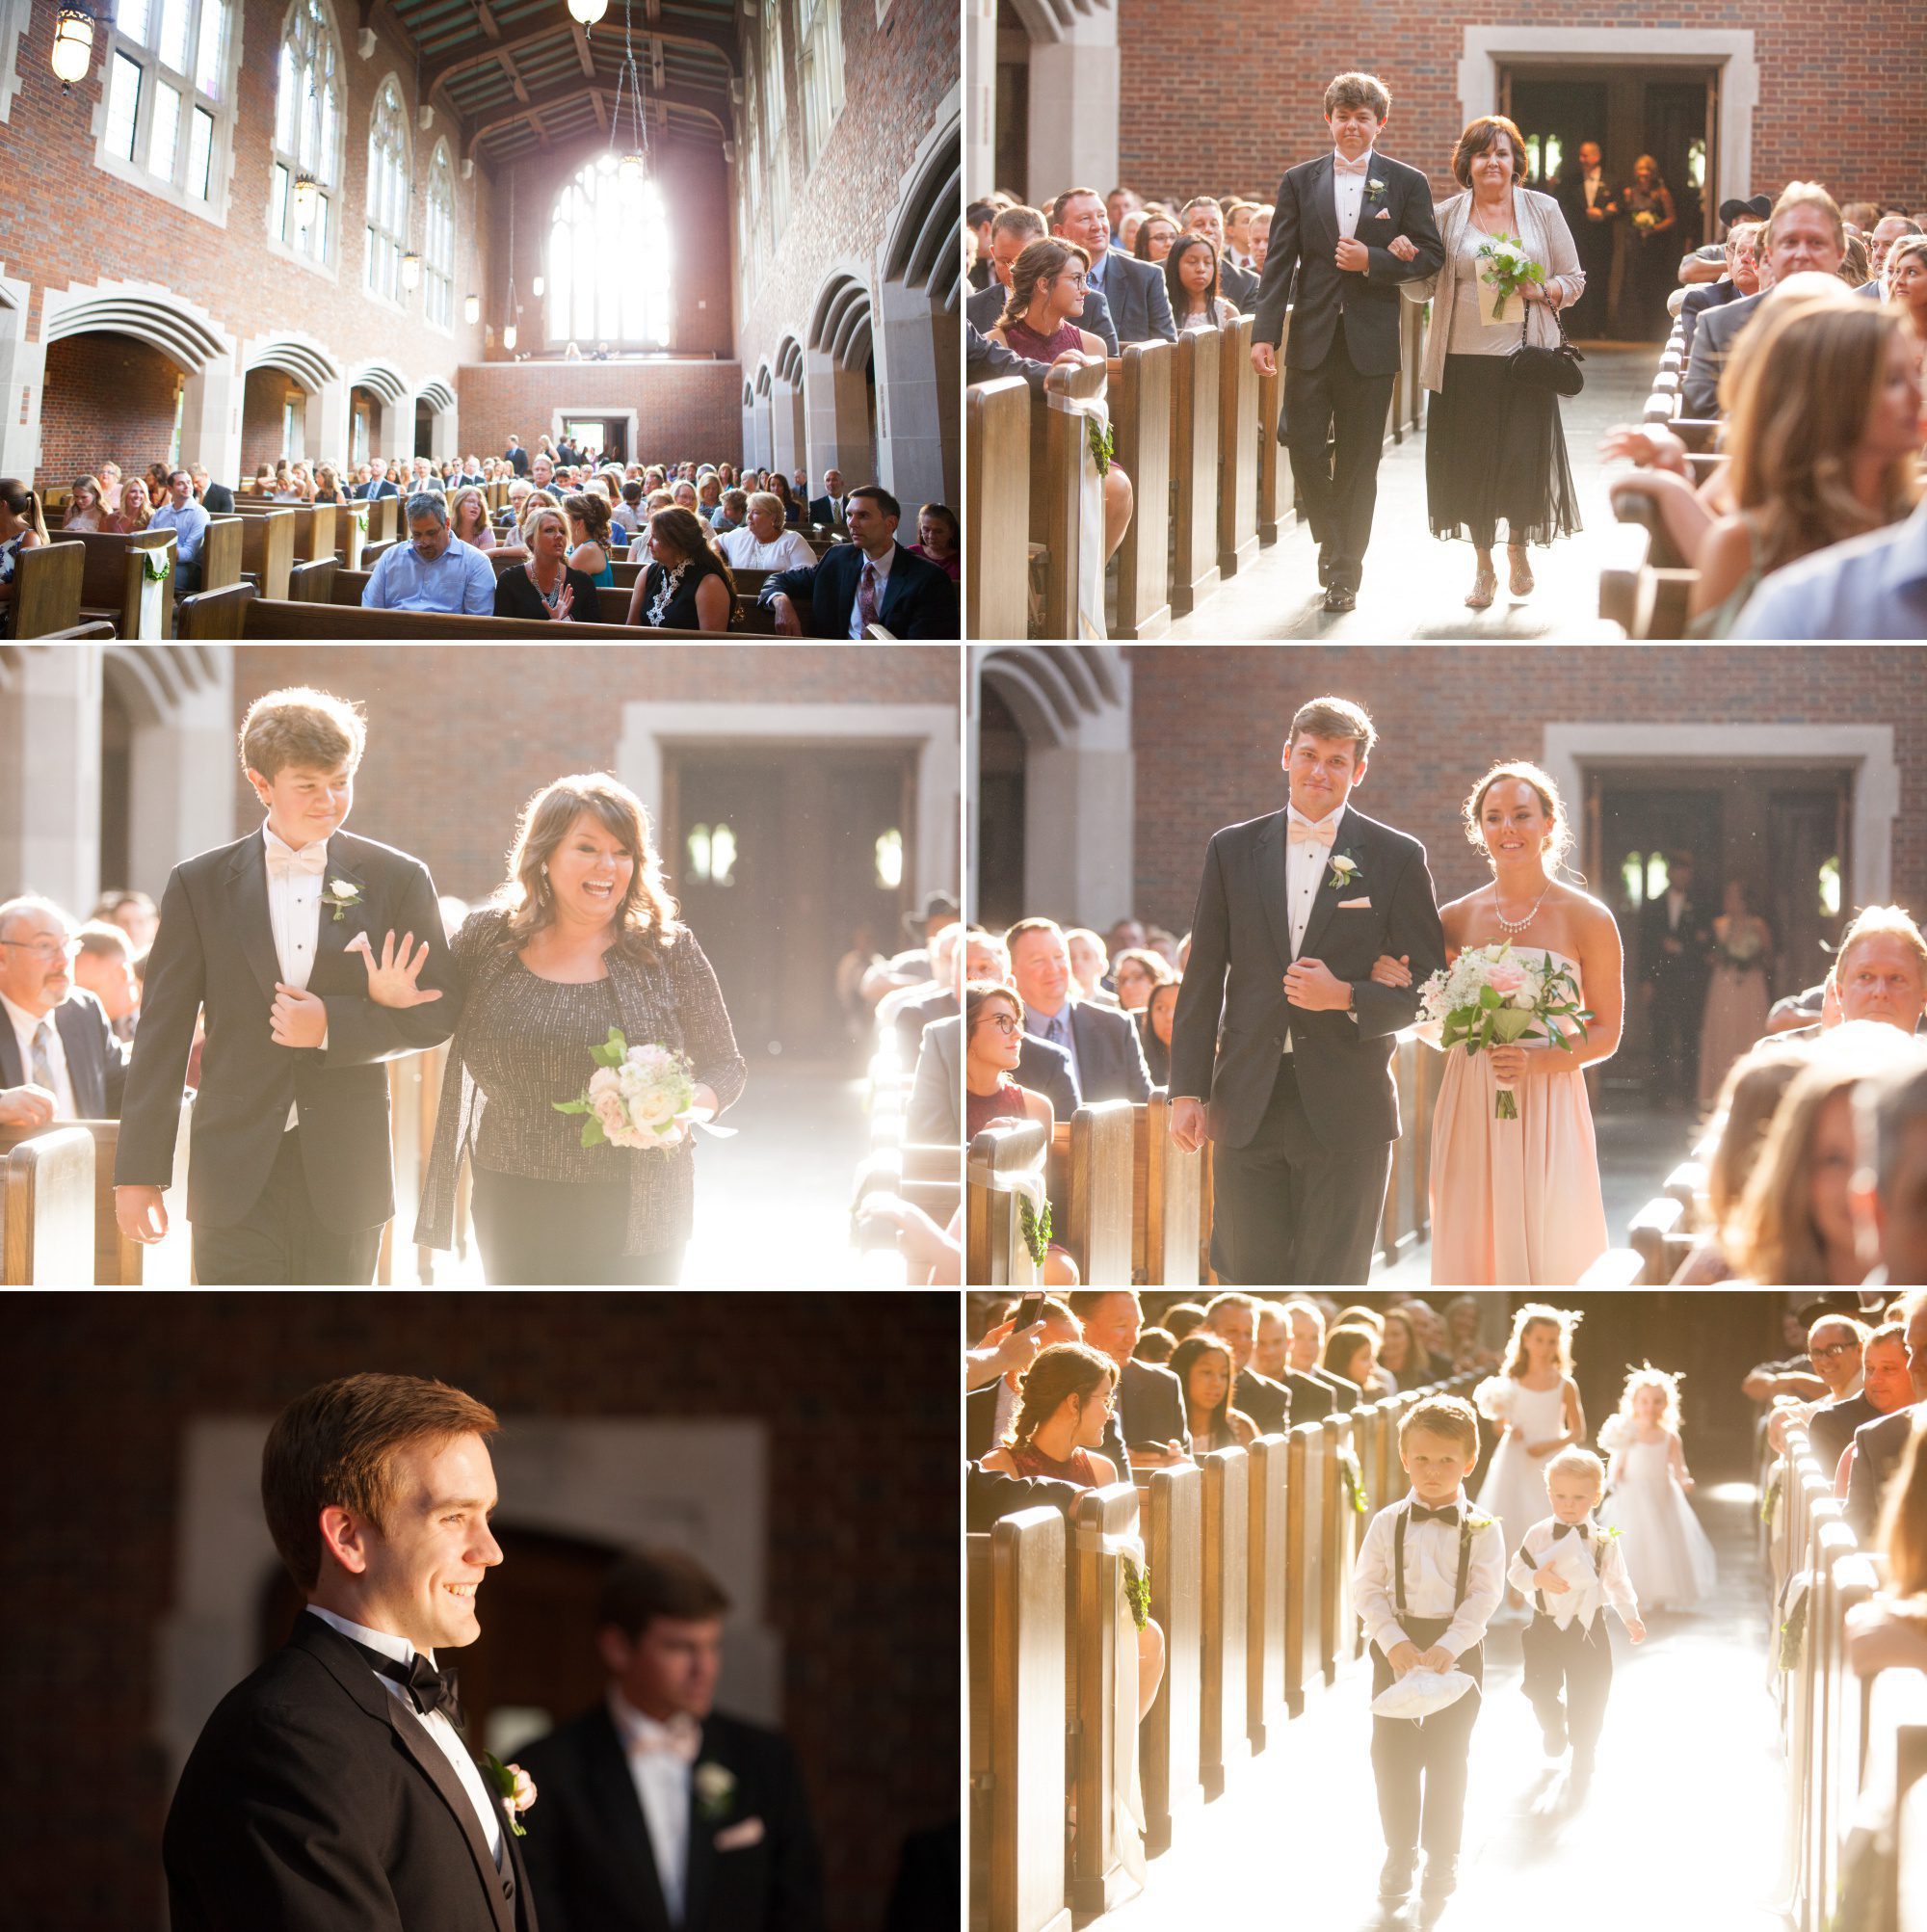 Wedding ceremony processional - Wightman Chapel at Scarritt Bennett before summer wedding ceremony in Nashville, TN. Photography by Krista Lee Photography.